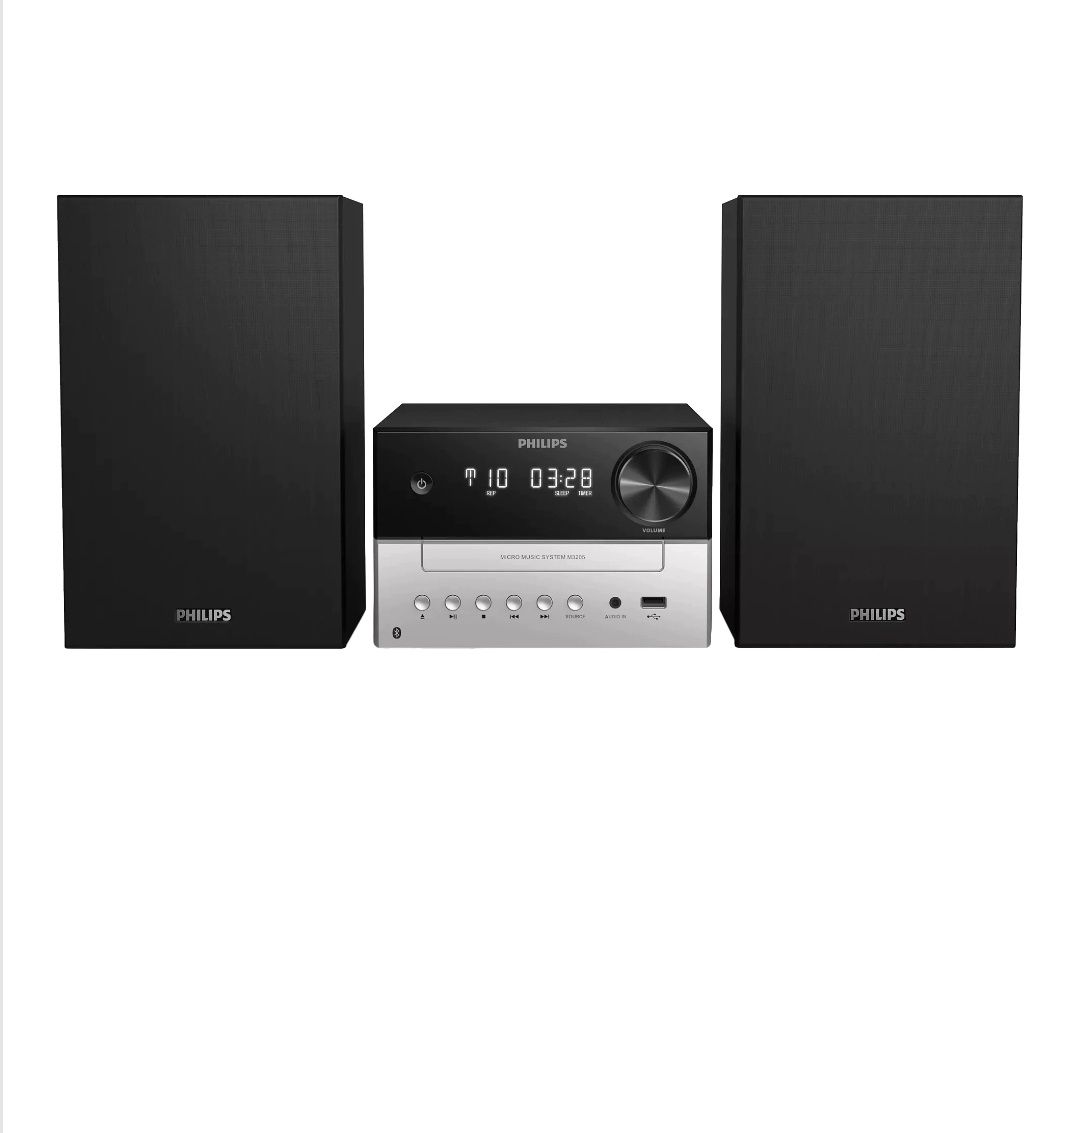 Philips Micro Music System 3000 series